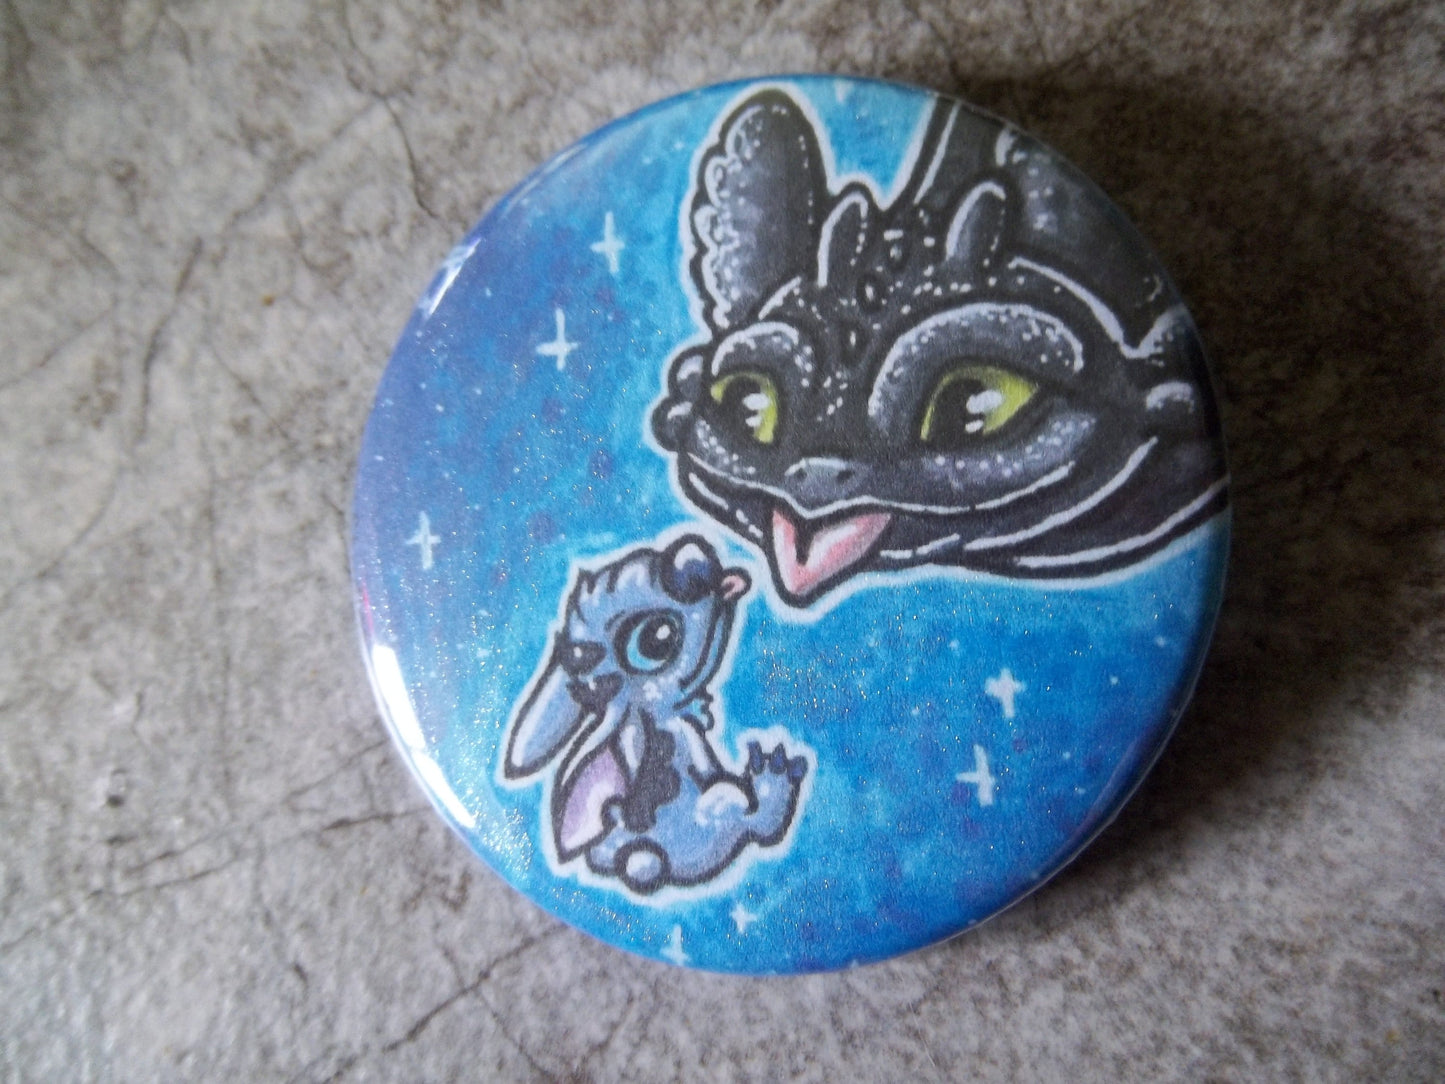 How To Train Your Dragon 2.25" Metal Pin Back Buttons